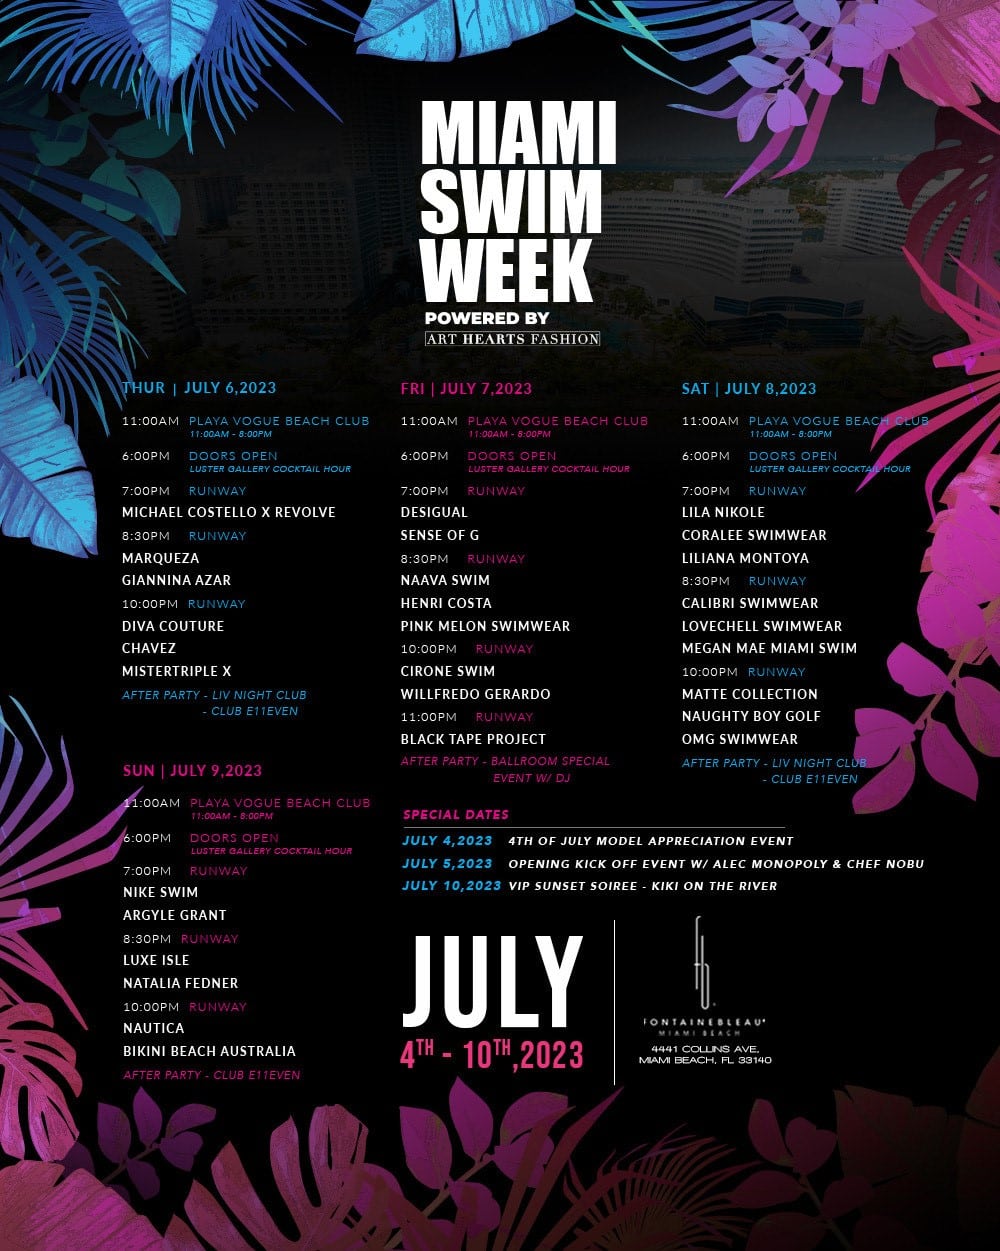 An Access Guide to Miami Swim Week Events & Fashions